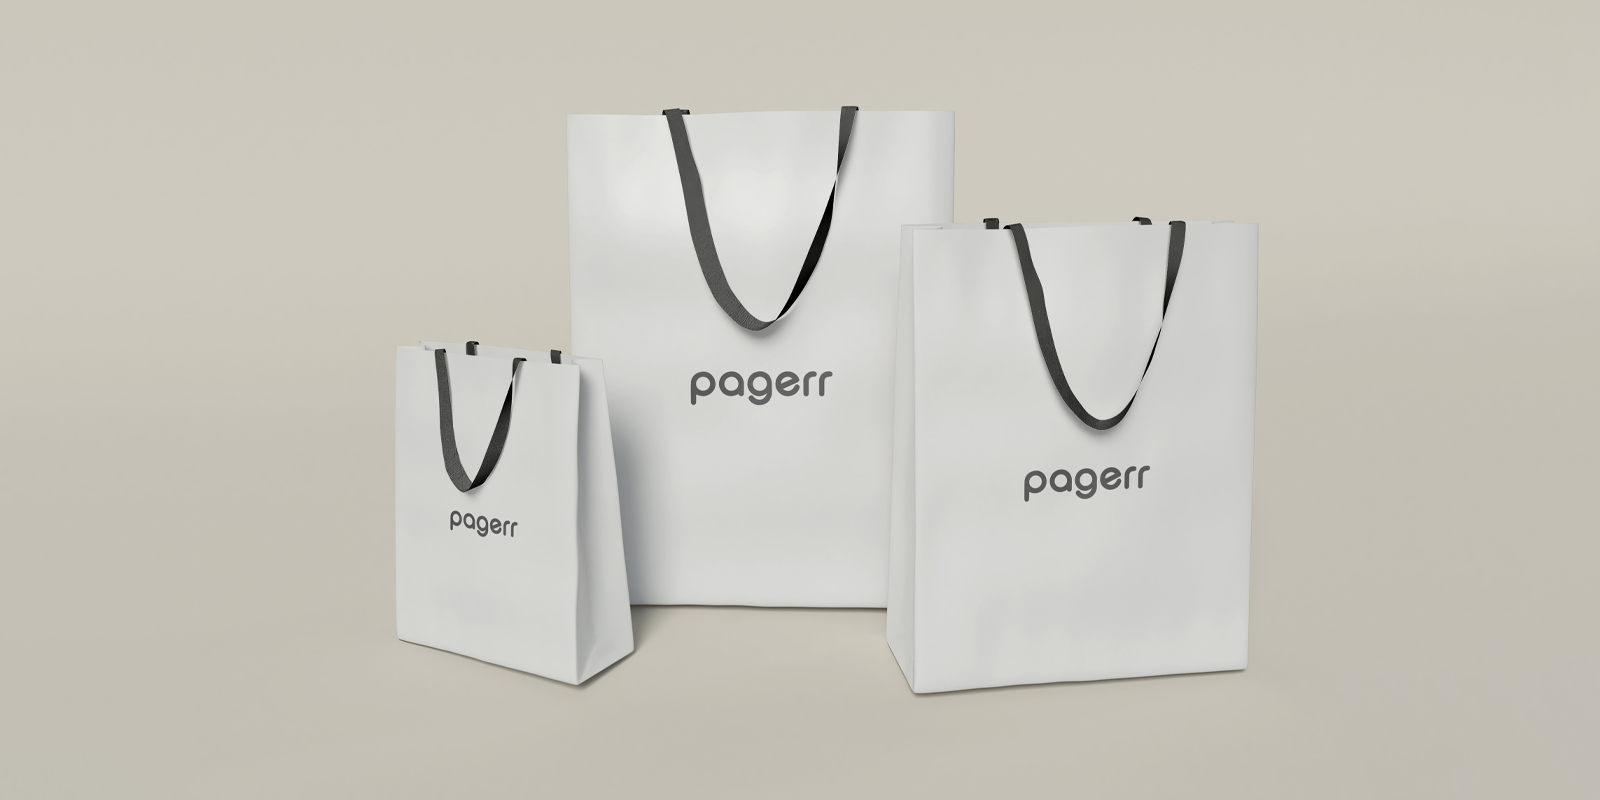 Shopping bags in Paris - Print with Pagerr